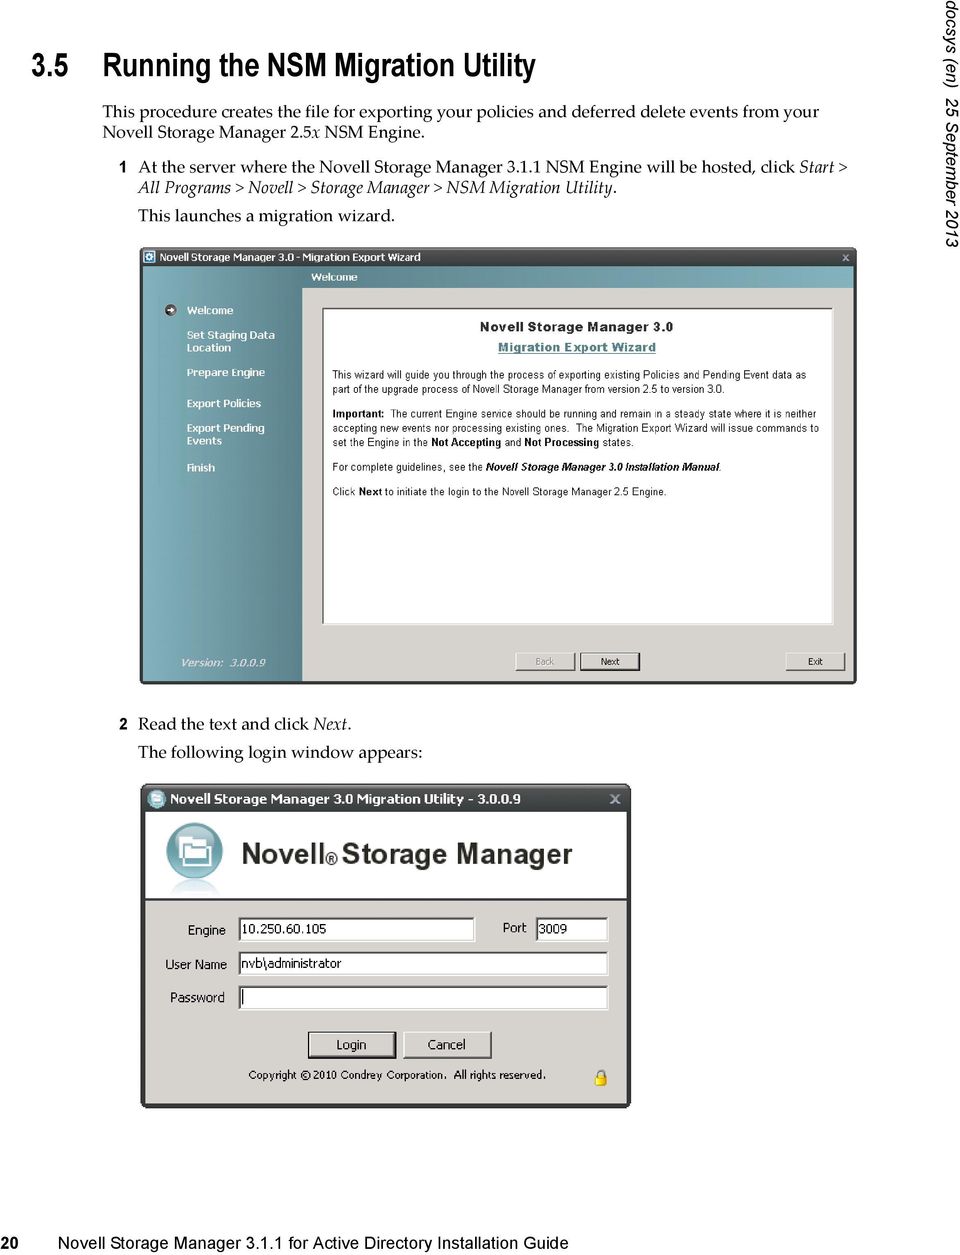 At the server where the Novell Storage Manager 3.1.